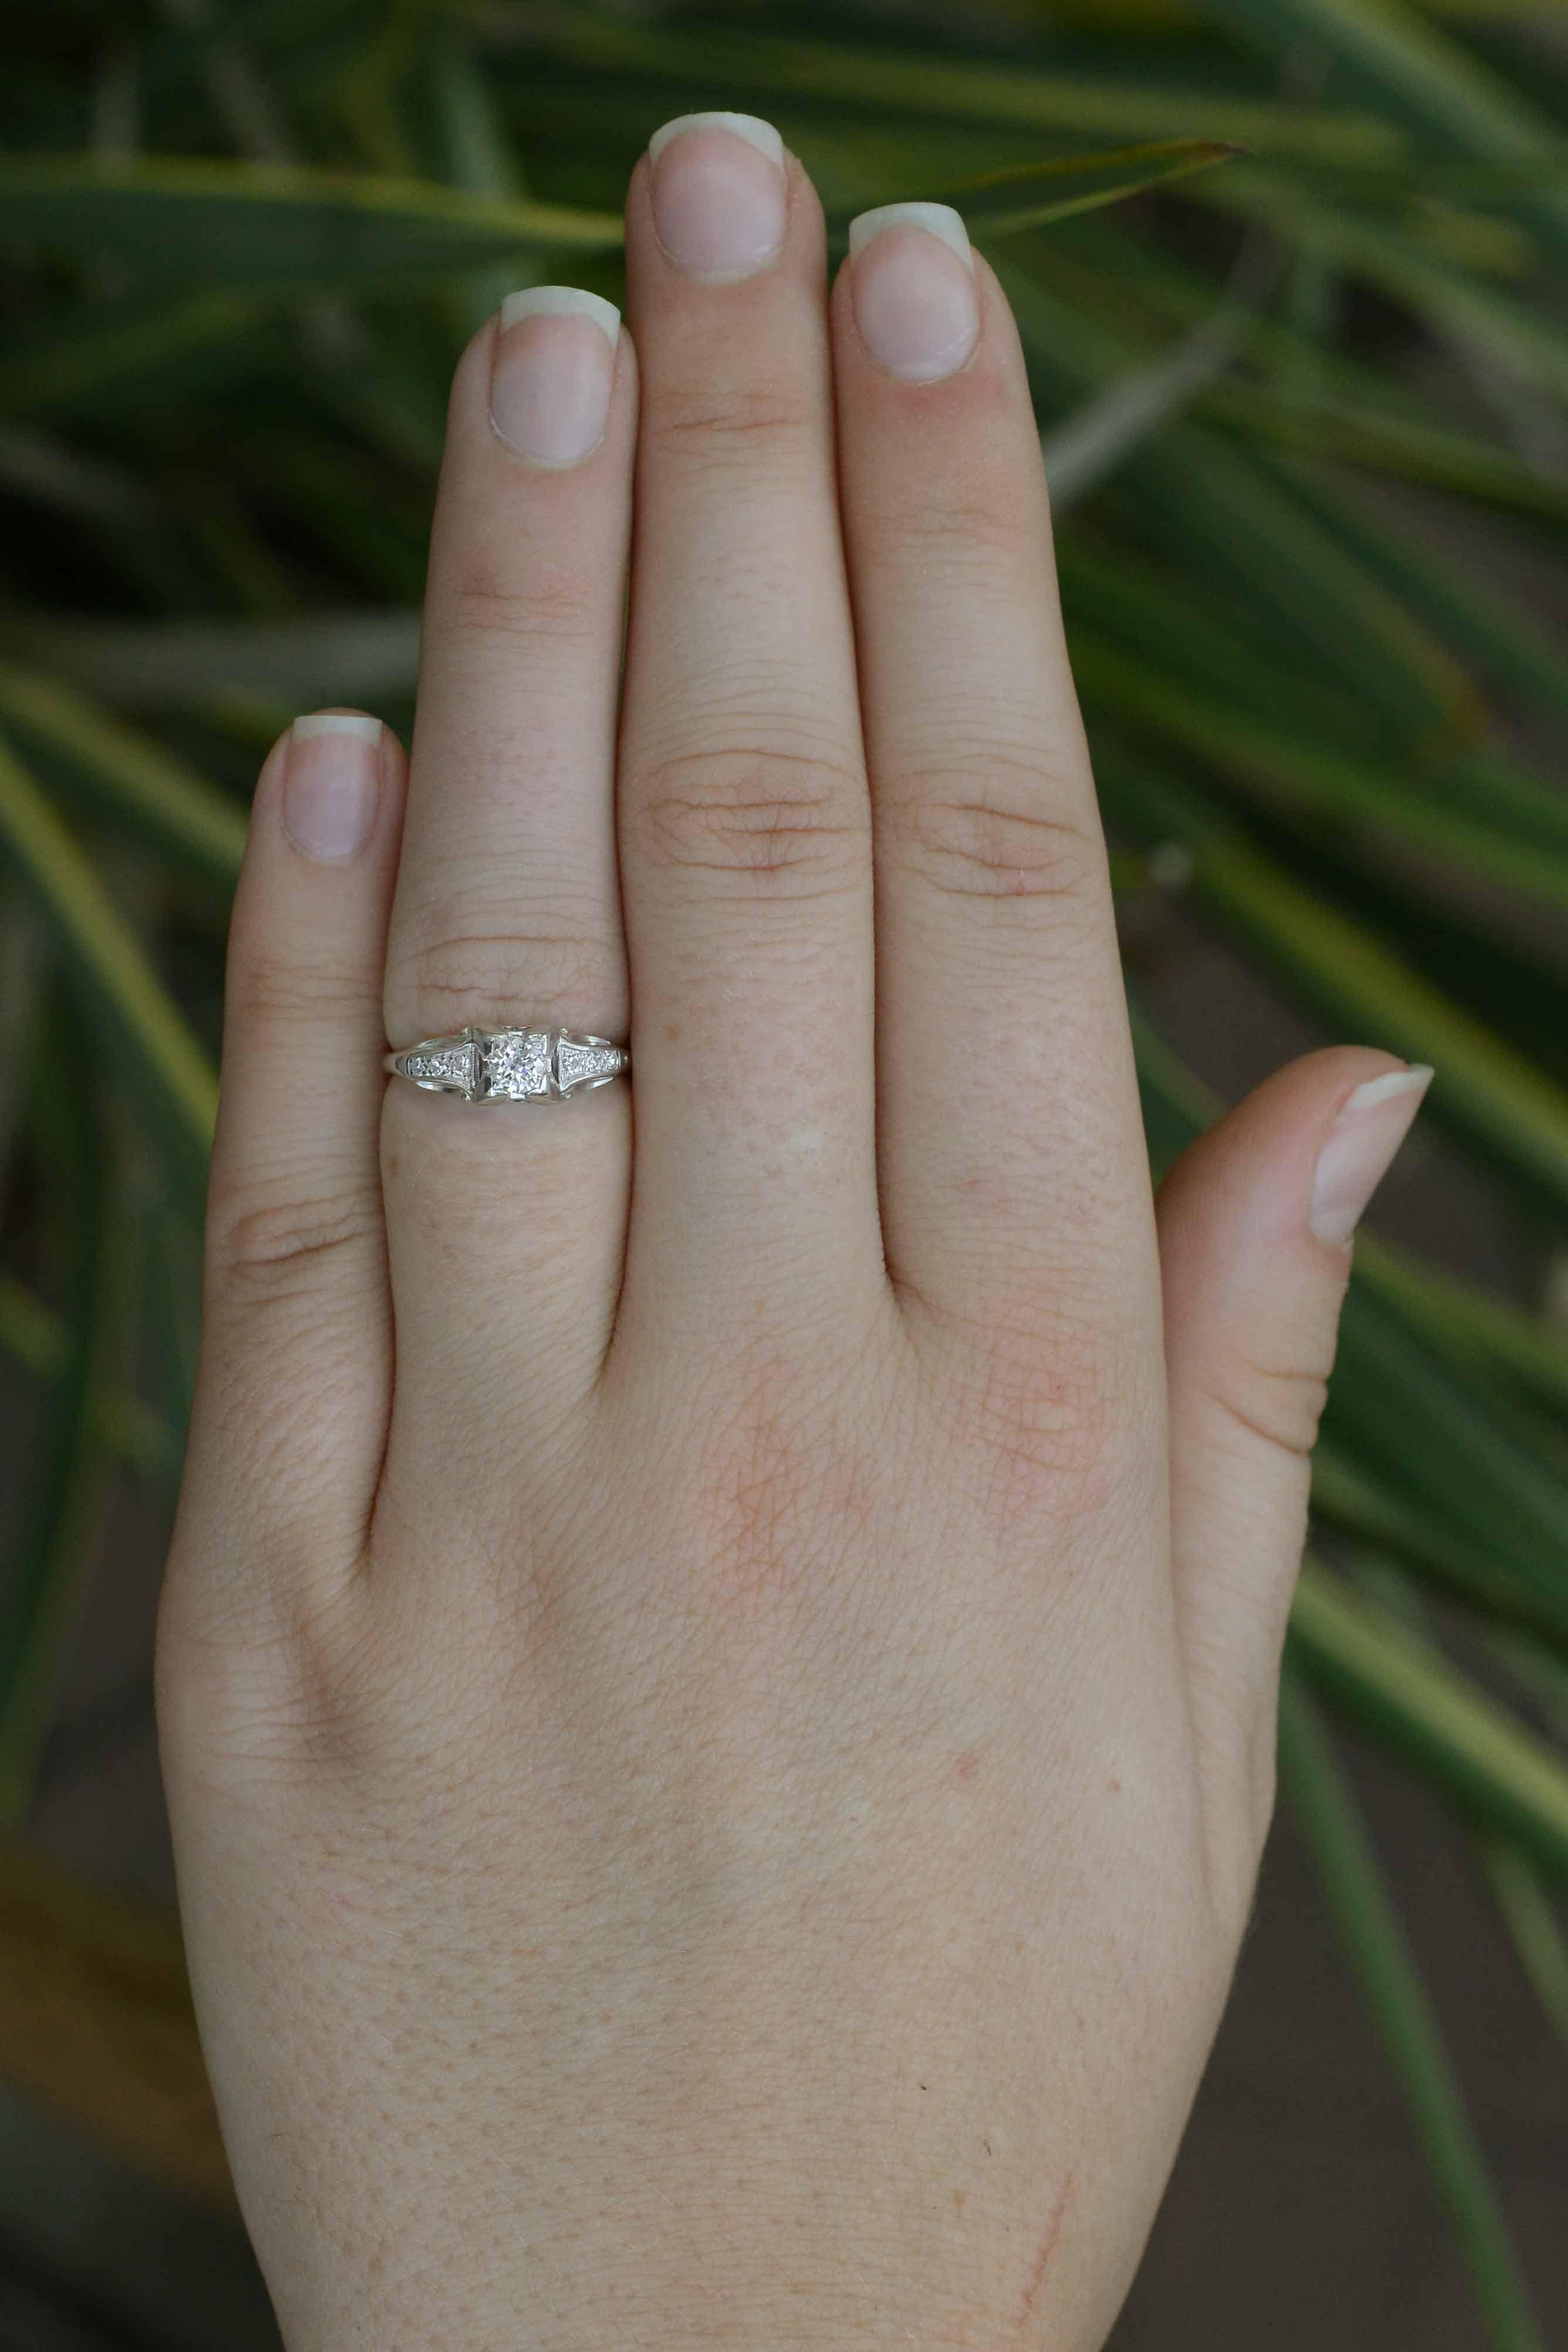 On the hunt for an affordable vintage engagement ring? Look no further. You will feel so elegant wearing this classic 100 year old ring! From it's captivating wide fluted prong setting, a faceted 1/4 carat near-colorless old European diamond glints